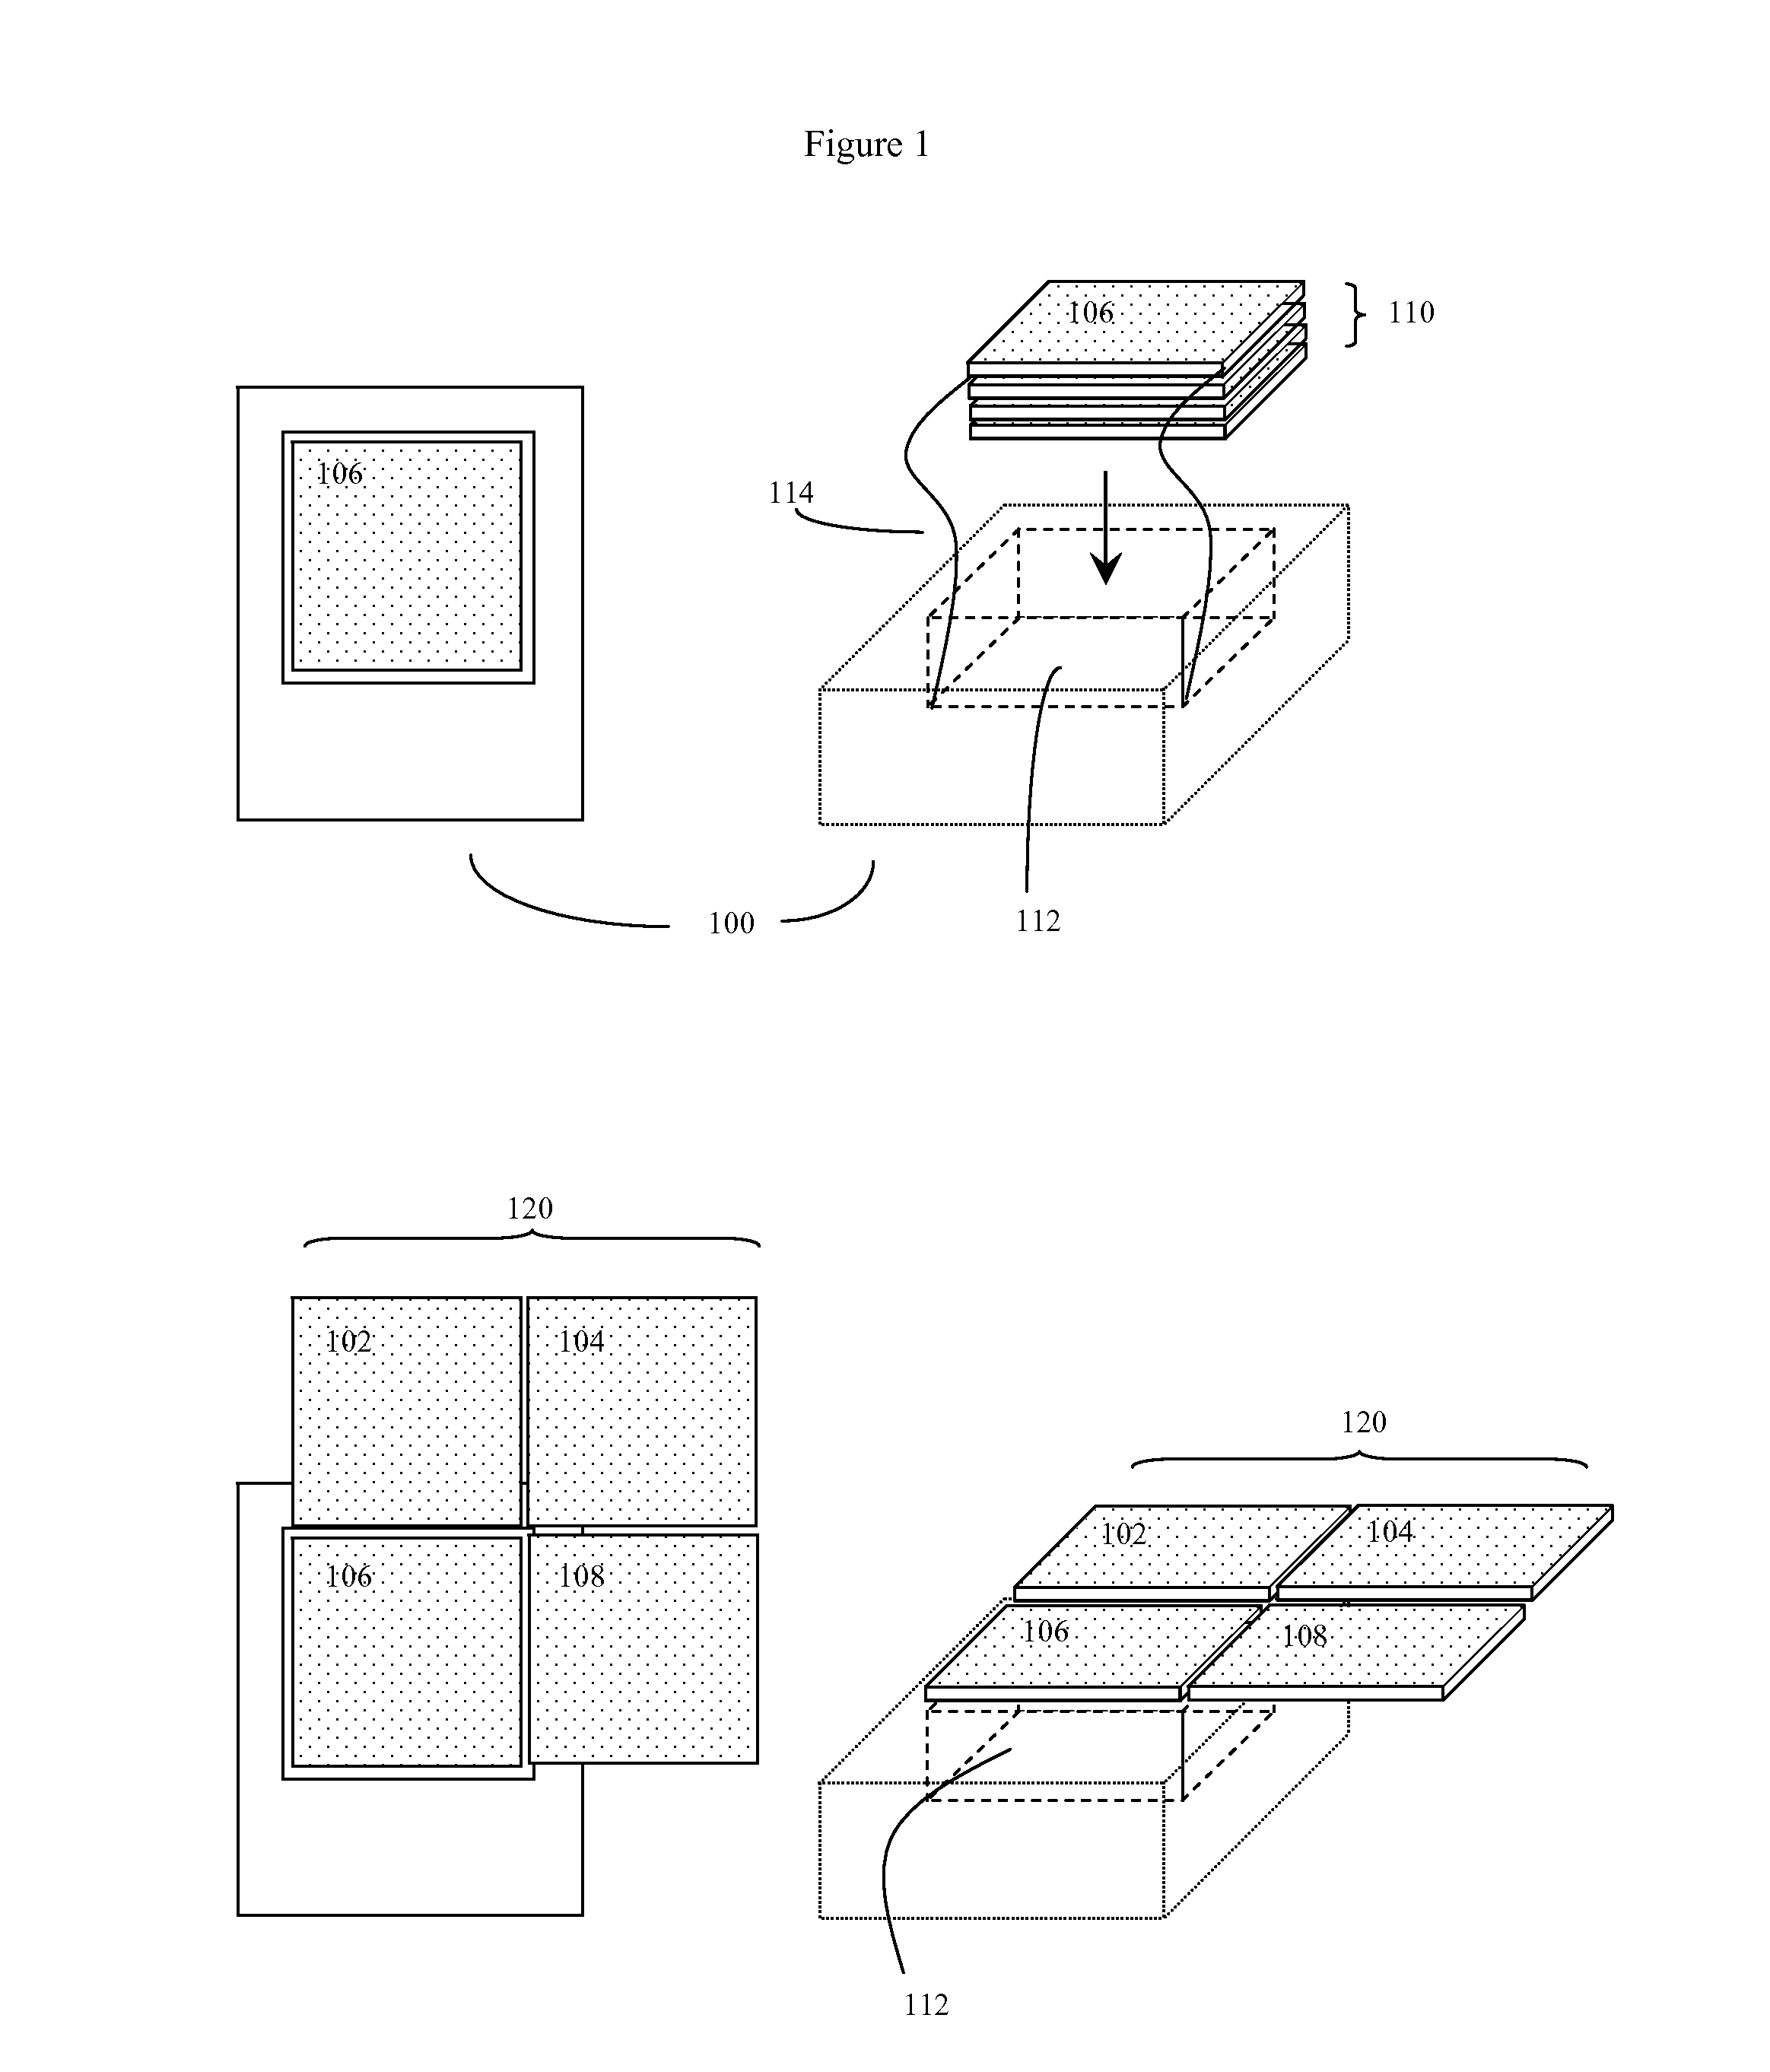 Computerized device with a plurality of variably configured display screens